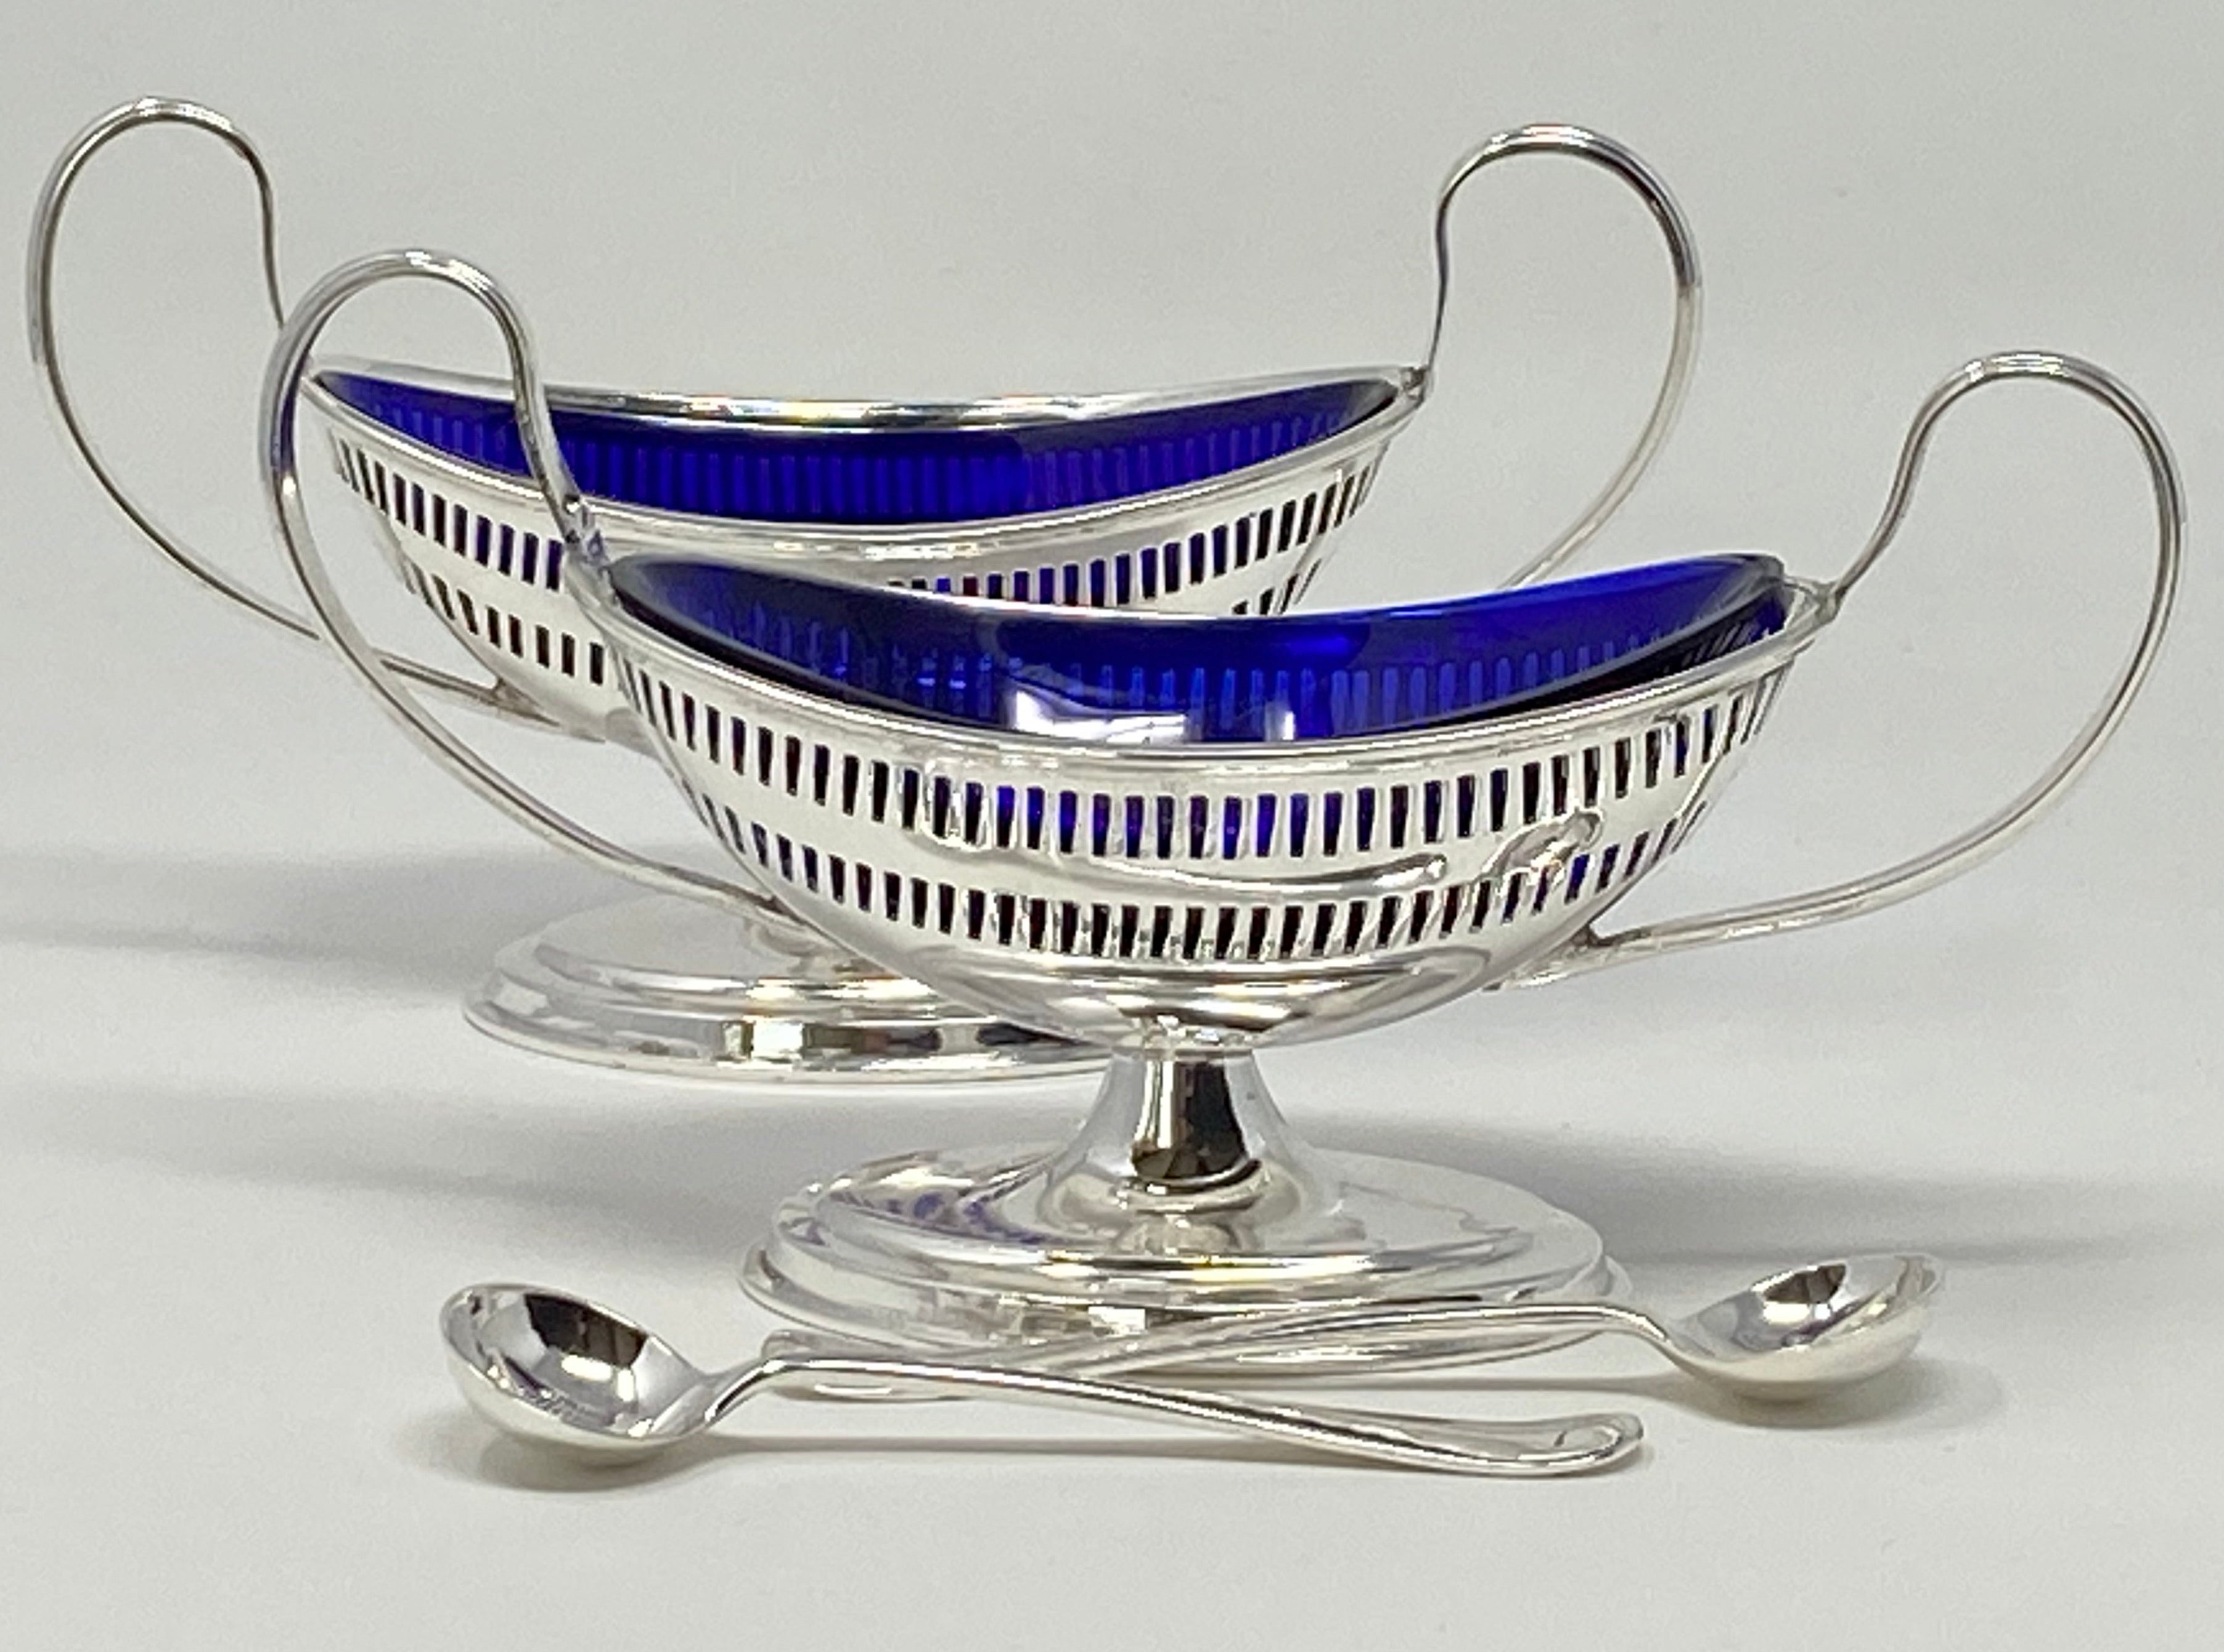 Pair of Victorian Silver Plated Salts with Blue Glass Liners and Spoons